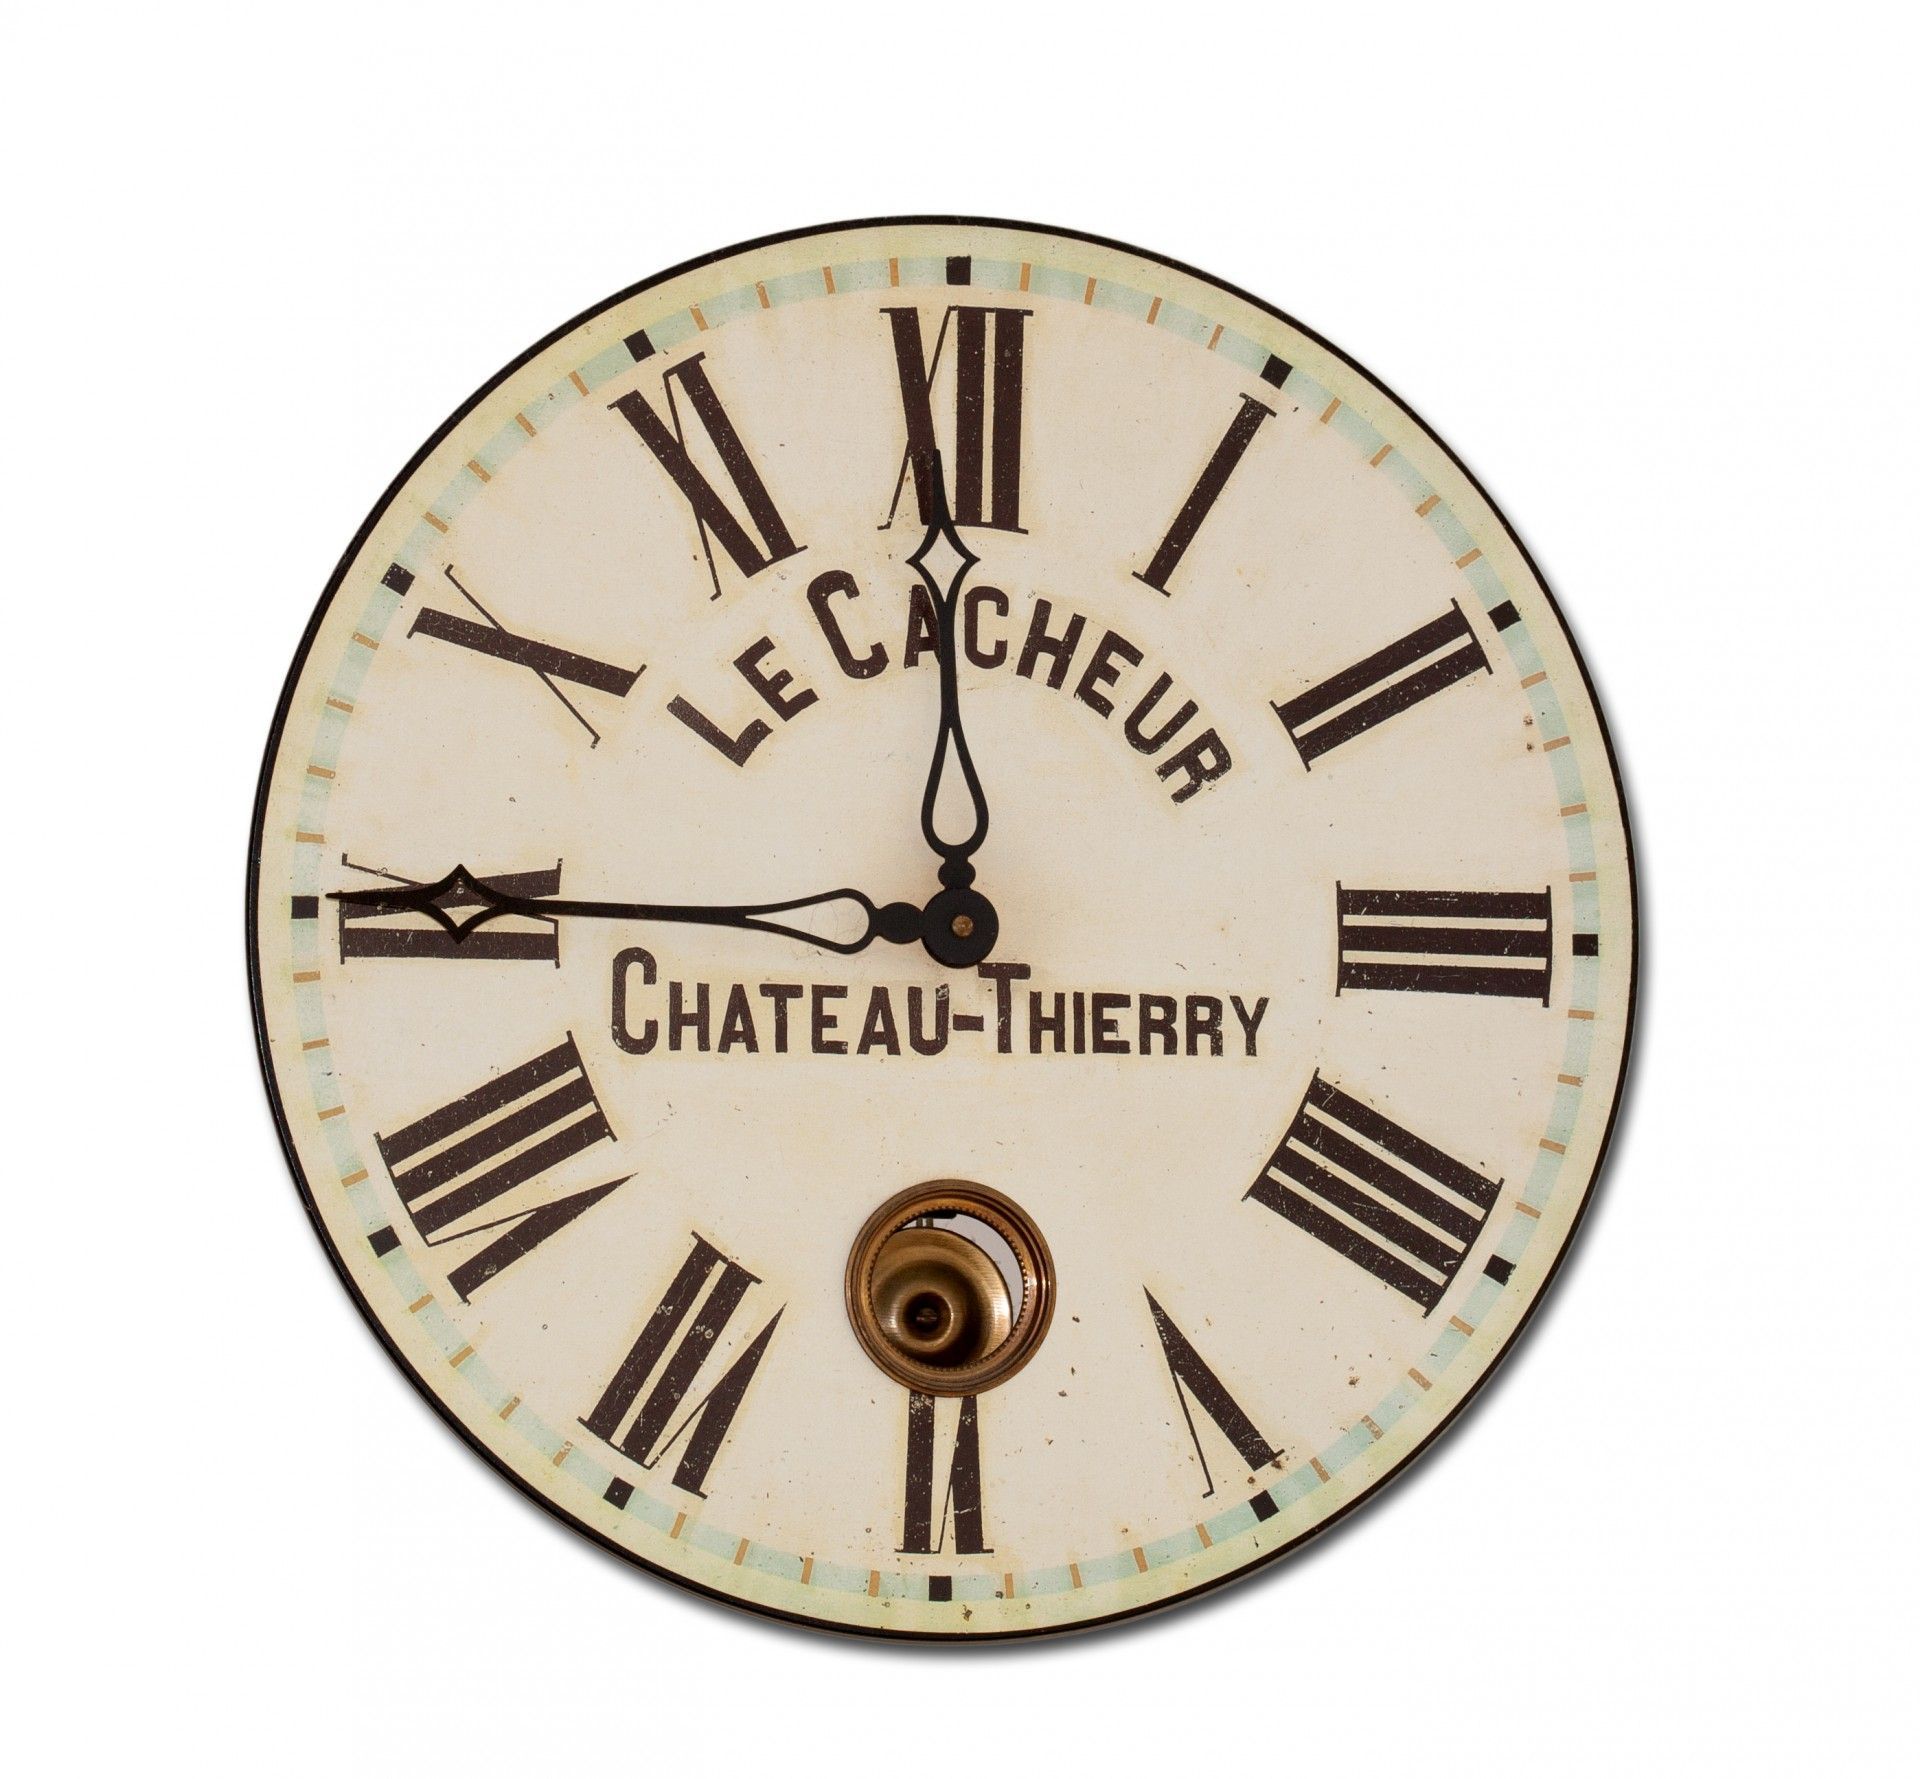 Vintage French Home Decor. French wall clock, Clock wallpaper, Wall clock